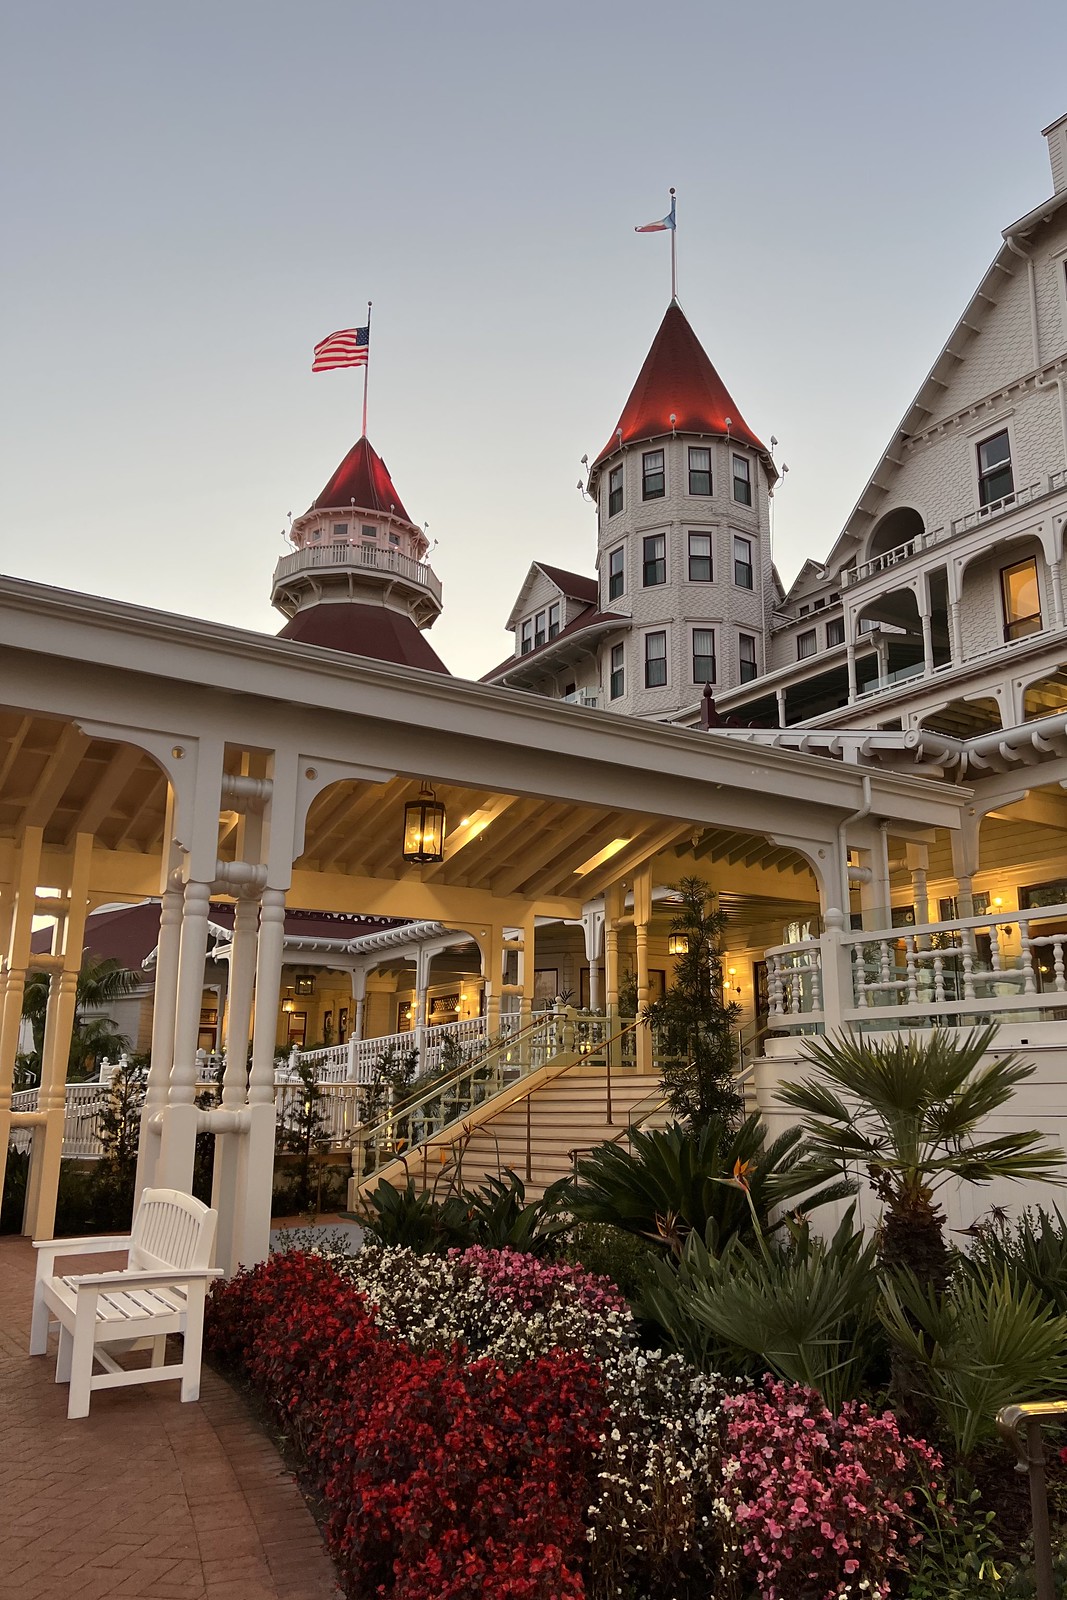 Hotel Del Coronado | Where to Stay in San Diego California | Best San Diego Hotels | 4 Day Itinerary San Diego, CA | San Diego Travel Guide | First Timer's Guide to a Long Weekend in San Diego | Best Things to do in San Diego | Southern California Vacation